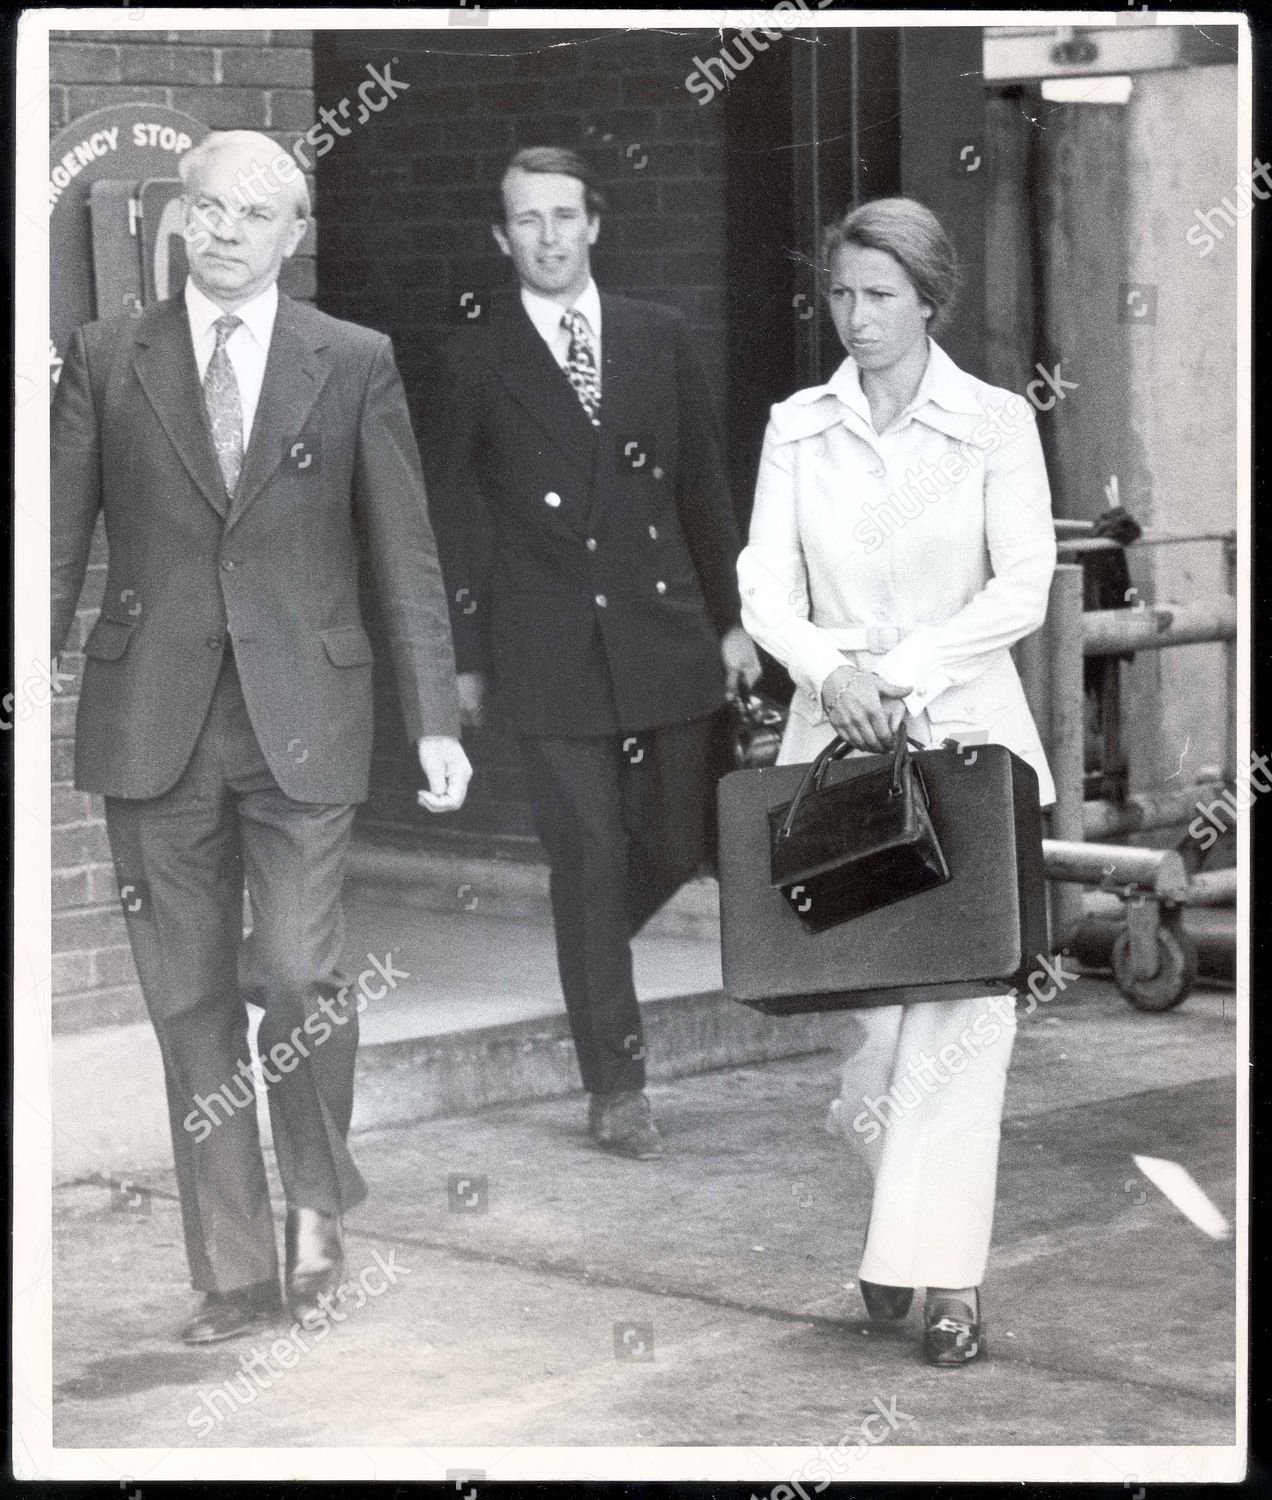 princess-anne-now-princess-royal-july-1975-wearing-a-safari-suit-princess-anne-lifts-a-suitcase-into-the-boot-of-a-car-watched-by-her-husband-capt-mark-phillips-shortly-after-their-arrival-today-from-boston-mass-they-have-been-in-america-taking-p-shutterstock-editorial-890968a.jpg